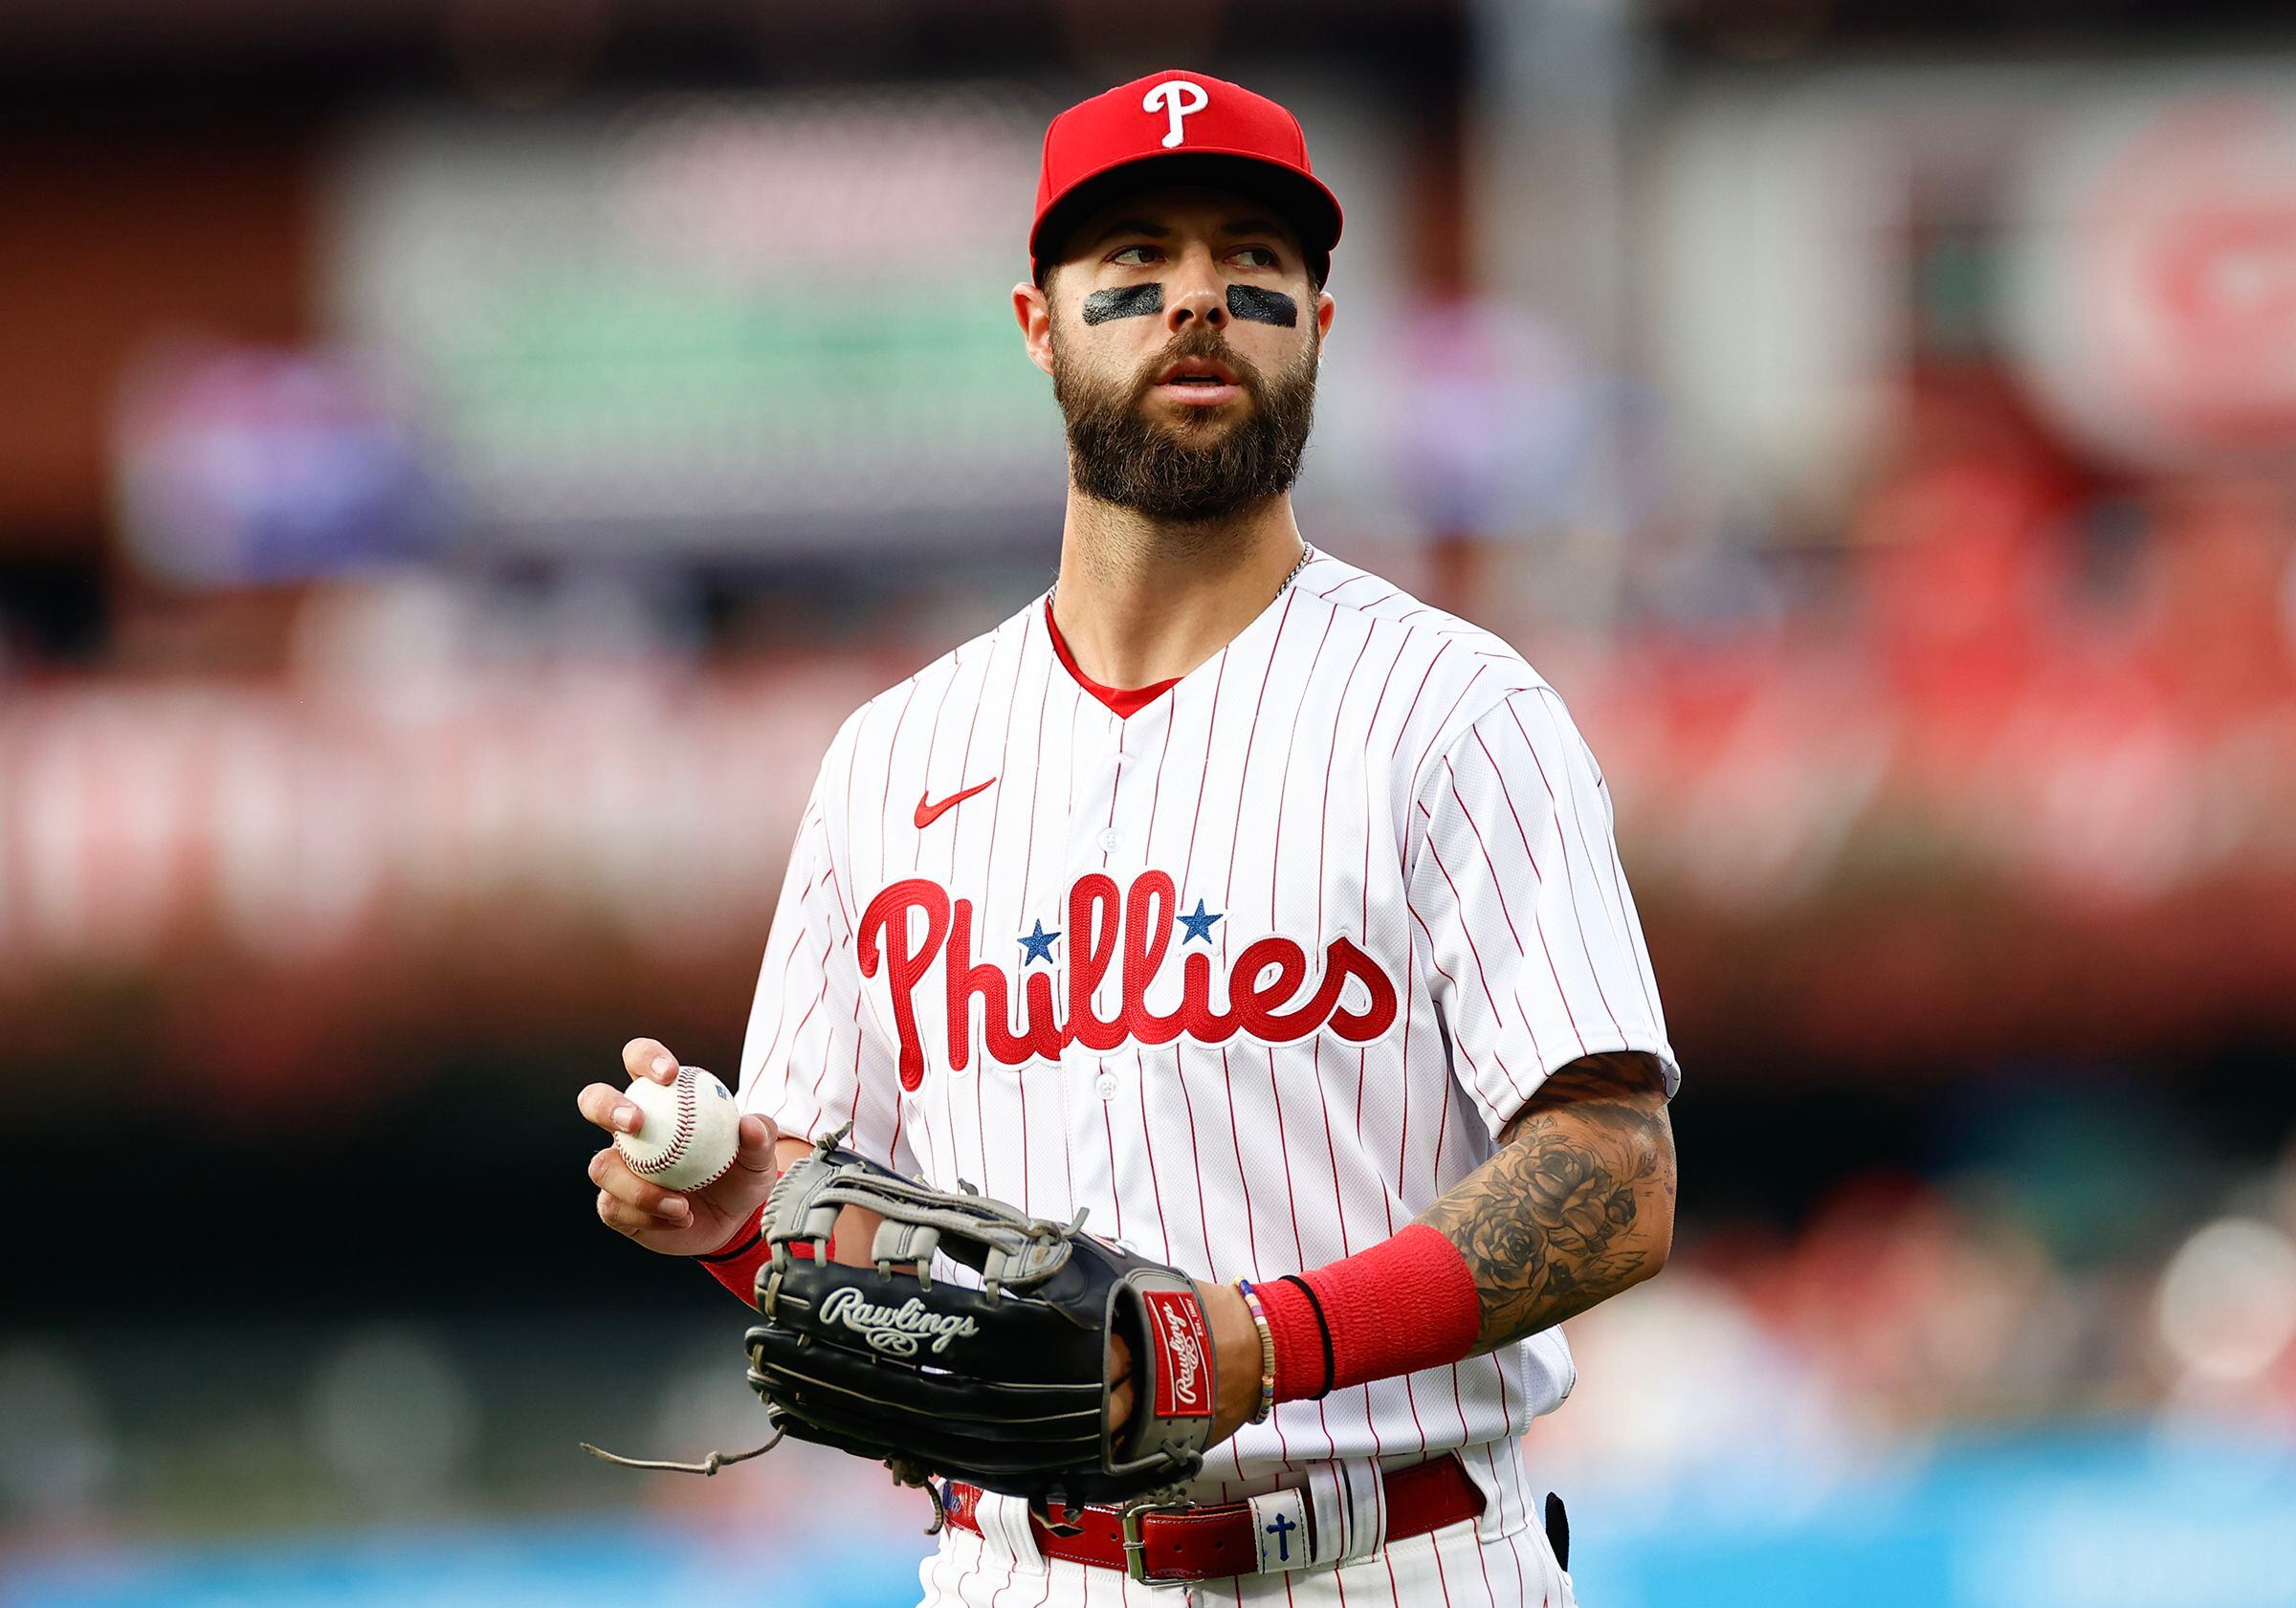 Phillies notes: A few roster moves ahead of playoffs; Weston